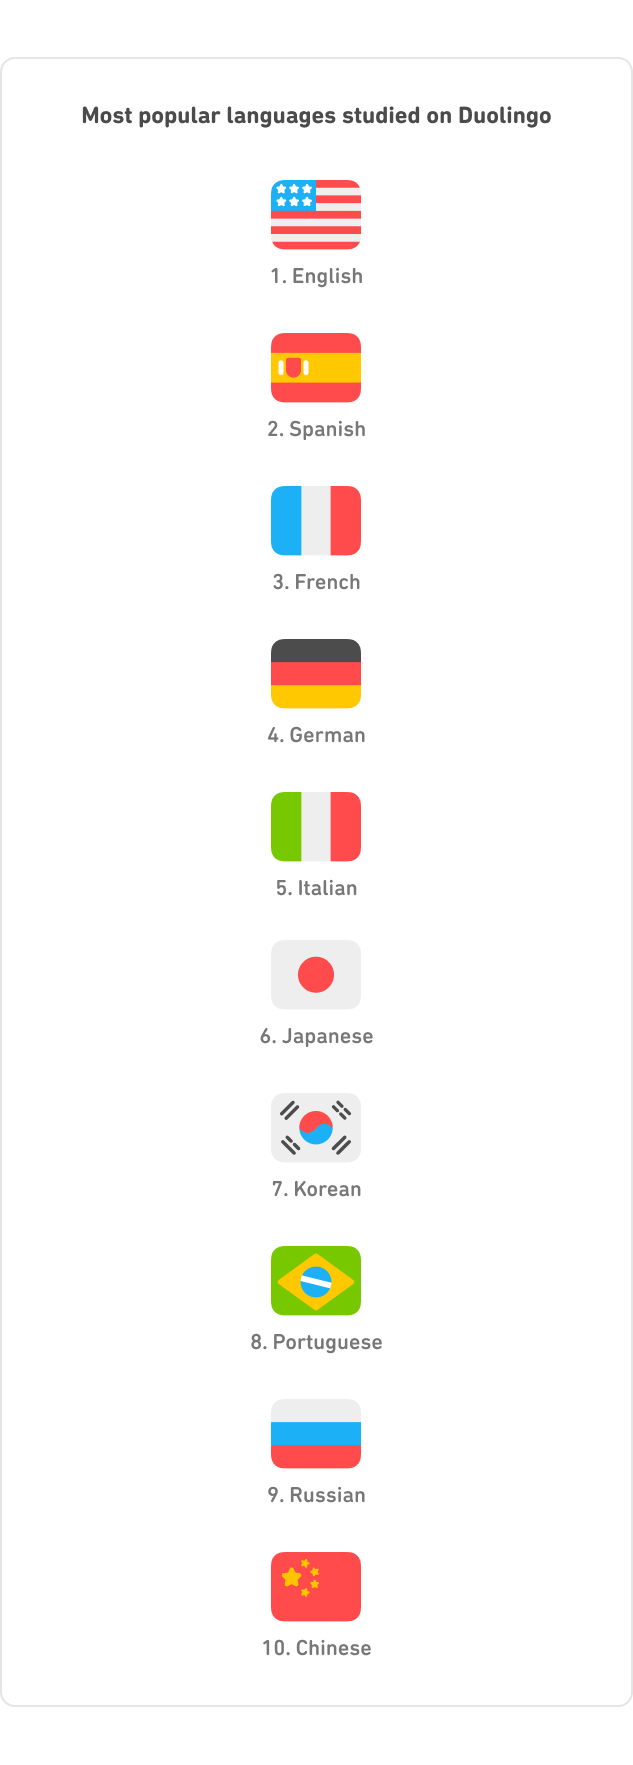 List of most popular languages studied on Duolingo: 1-English, 2-Spanish, 3-French, 4-German, 5-Italian, 6-Japanese, 7-Korean, 8-Portuguese, 9-Russian, 10-Chinese